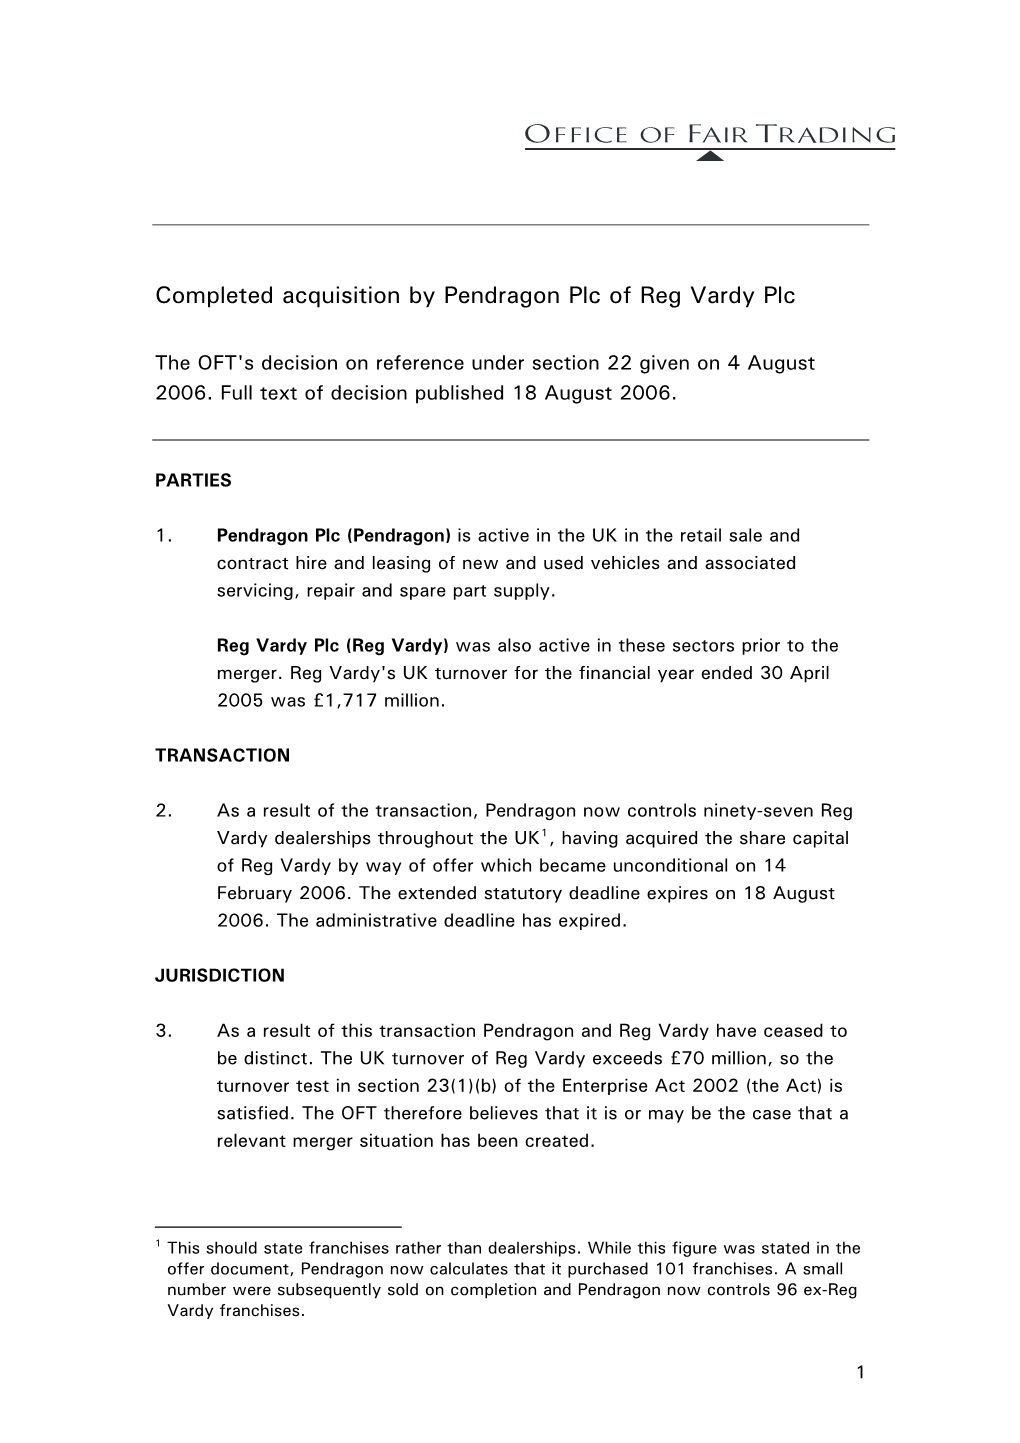 Completed Acquisition by Pendragon Plc of Reg Vardy Plc